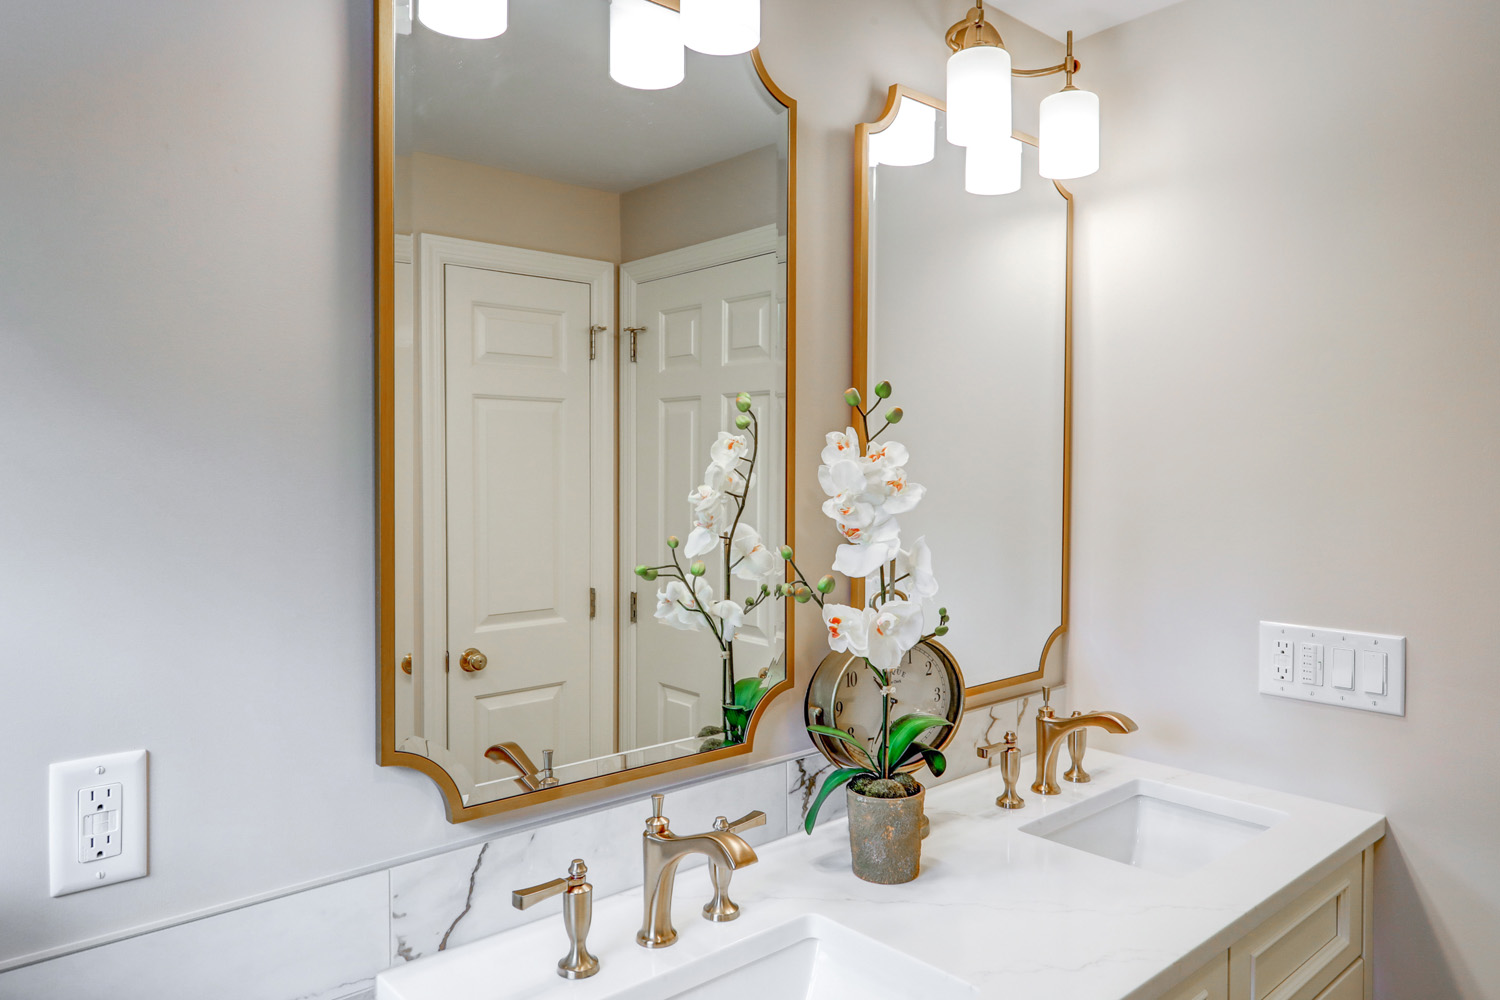 Manheim Township Master Bathroom Remodel with gold accents